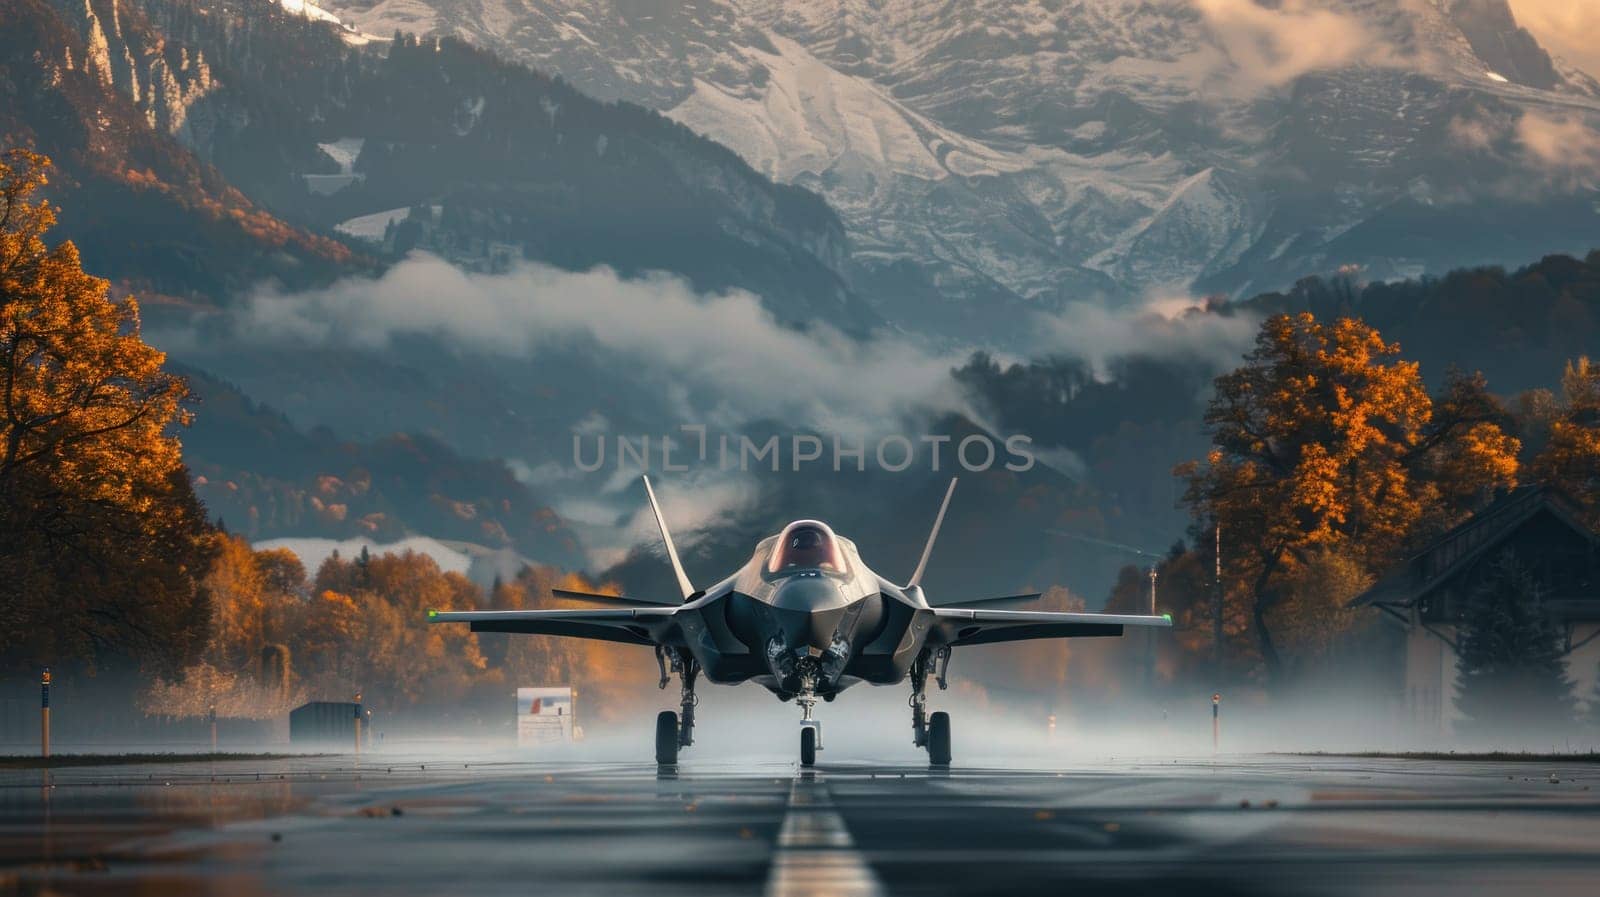 Striking Image of a Fighter Jet Landing on a Swiss Highway Framed by Majestic Swiss Alps